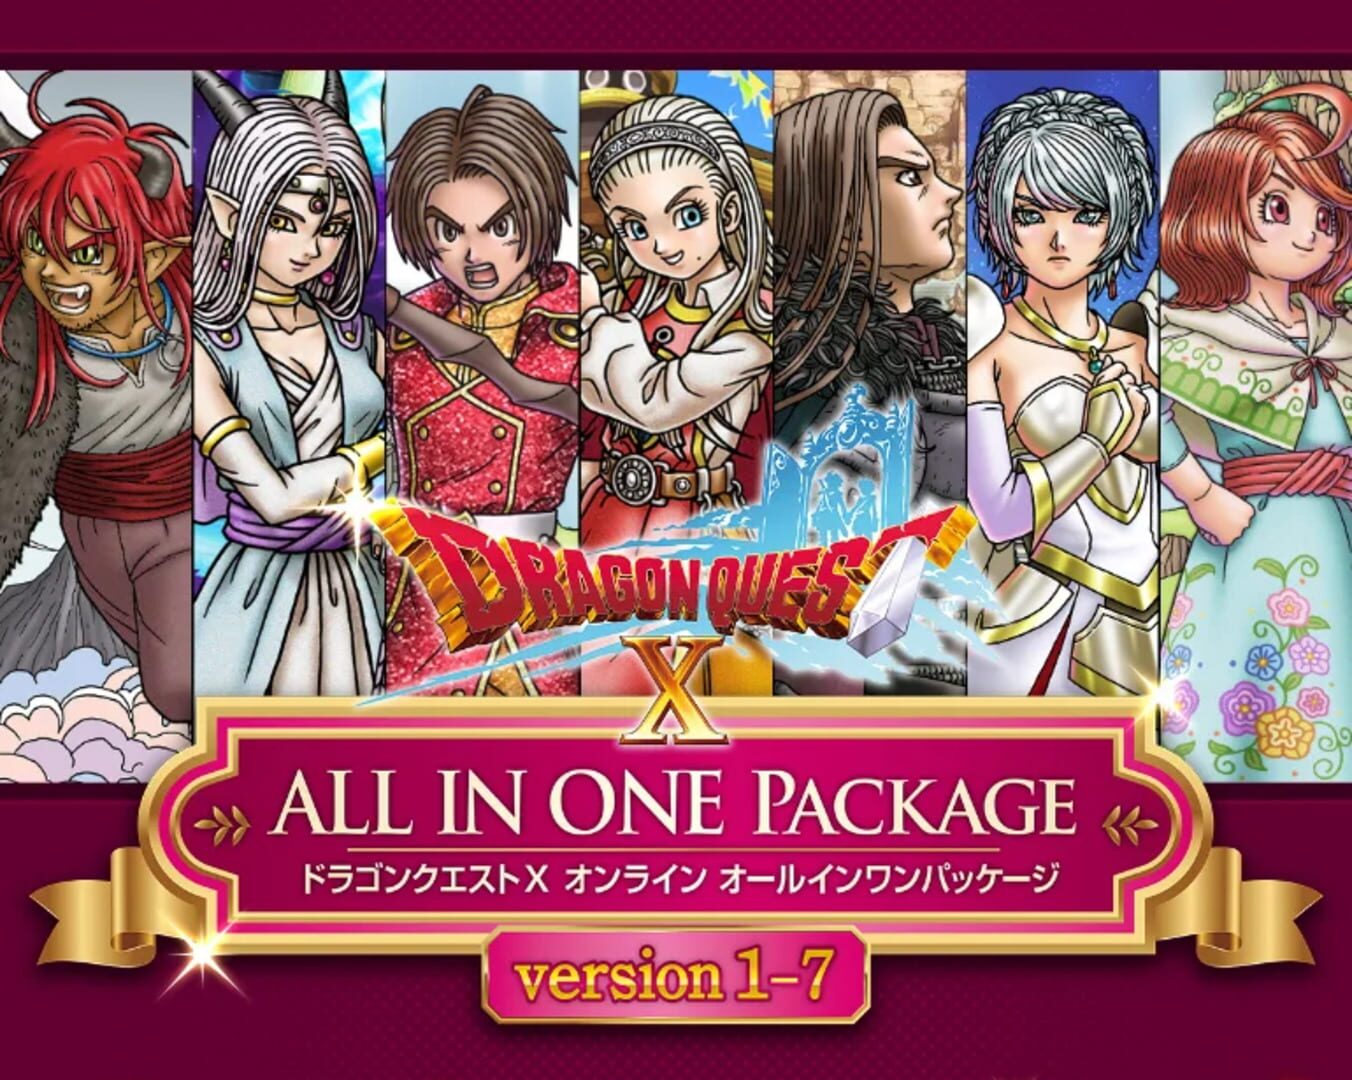 Dragon Quest X: All In One Package - Versions 1-7 screenshot